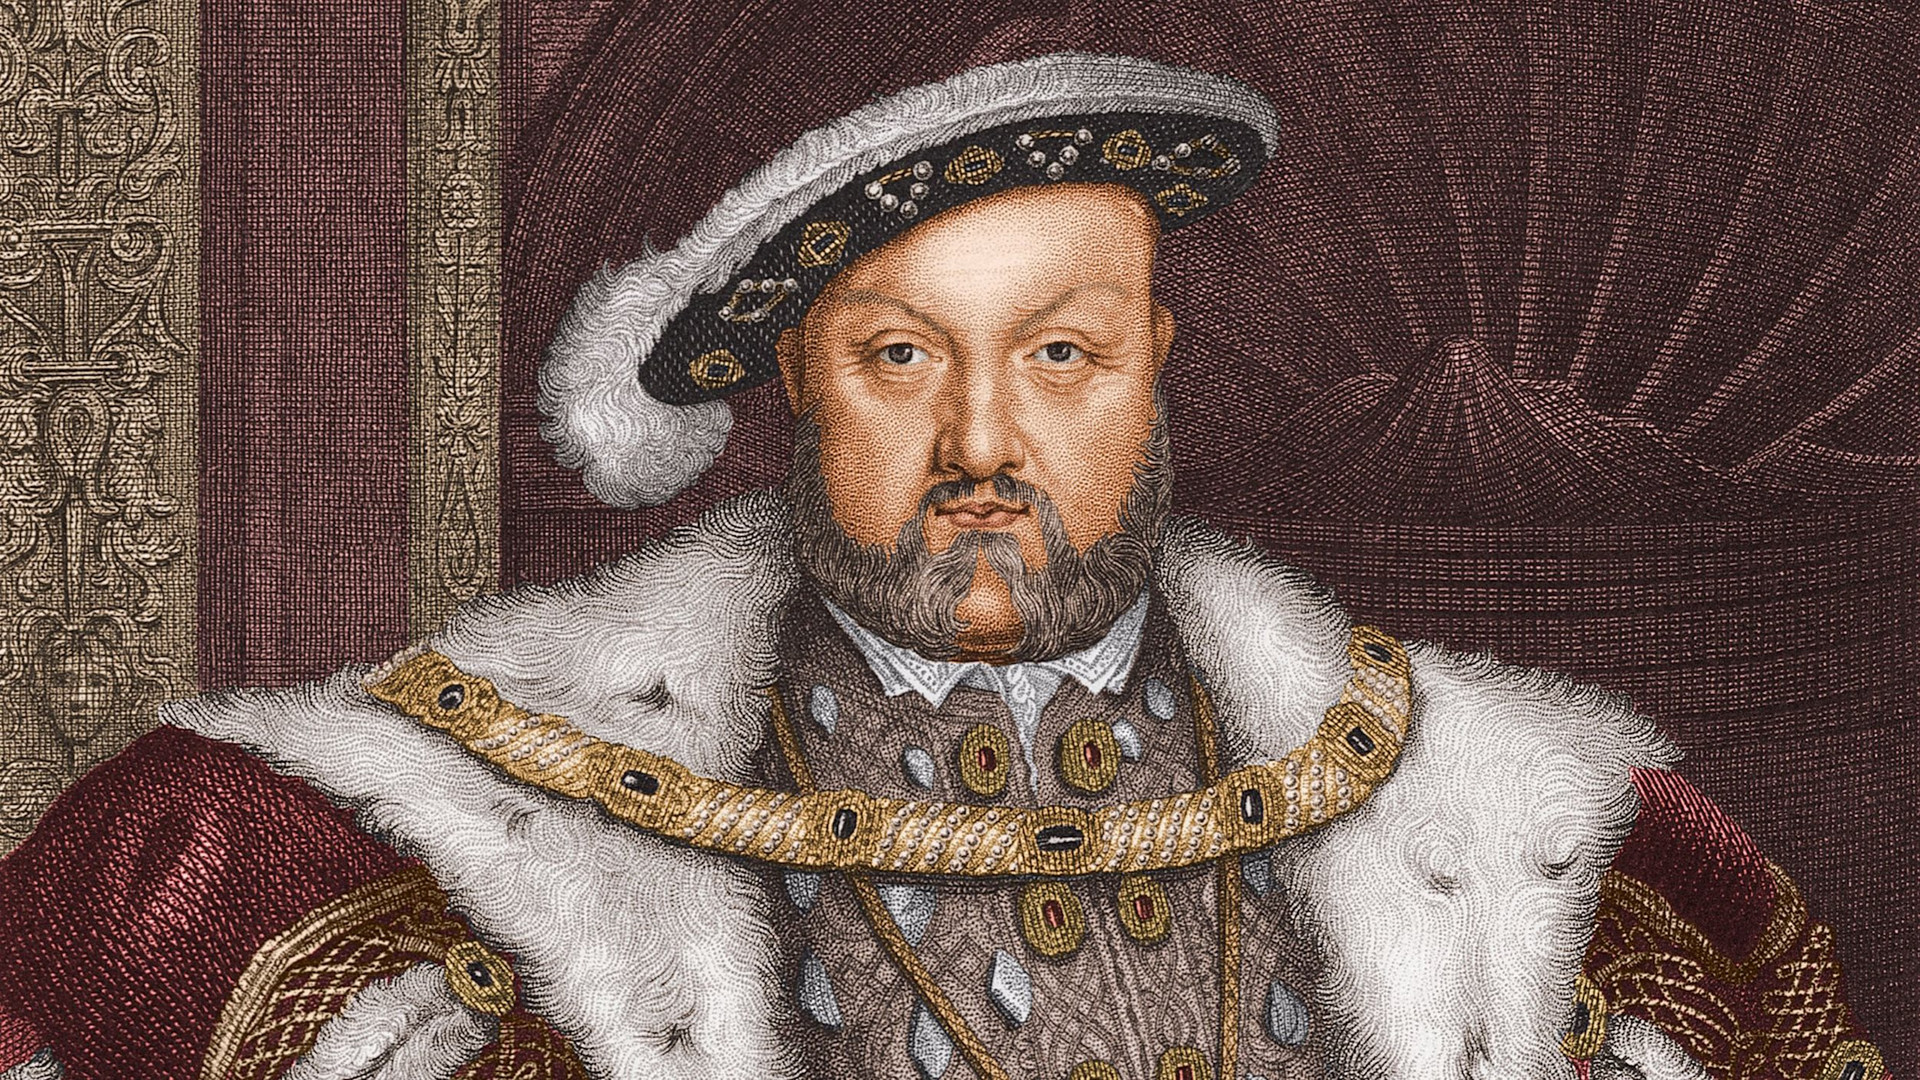 henry-viii-of-england-1491-1547-reigned-1509-47-executed-three-wives-and-thomas-more-made-union-of-england-and-wales-photo-by-stock-montagegetty-images.jpg